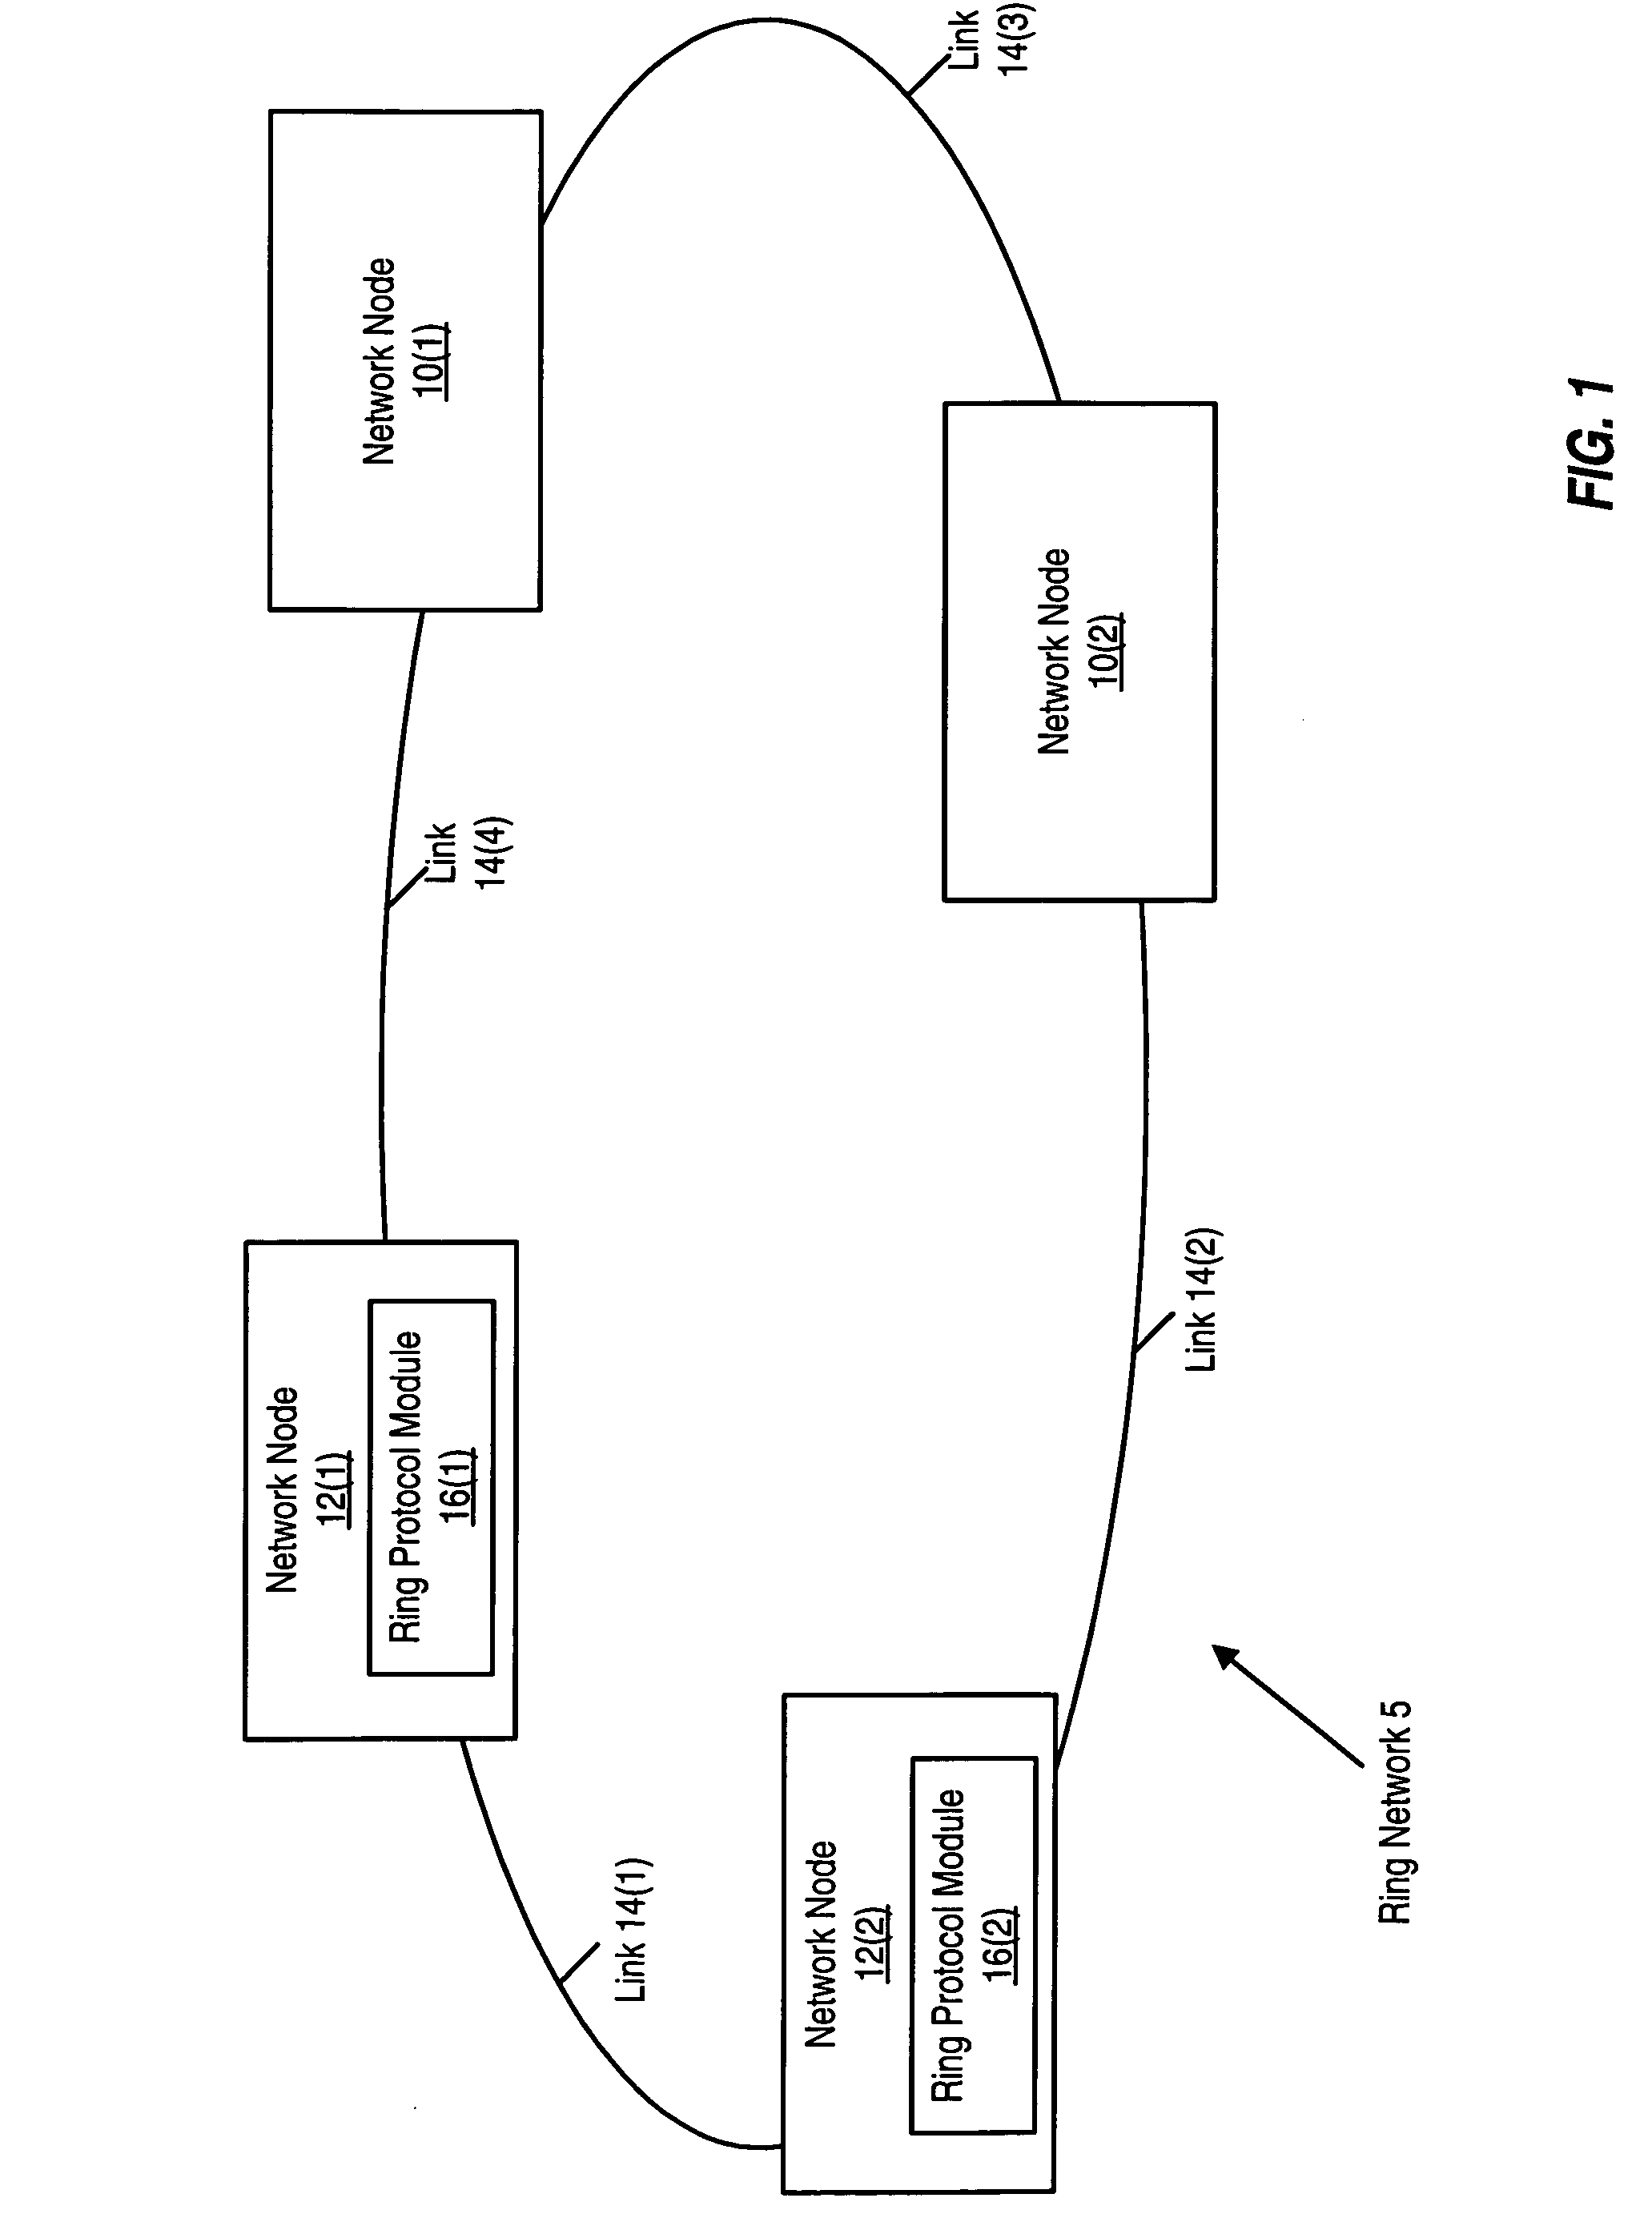 System and method for integrating ring-protocol-compatible devices into network configurations that also include non-ring-protocol compatible devices